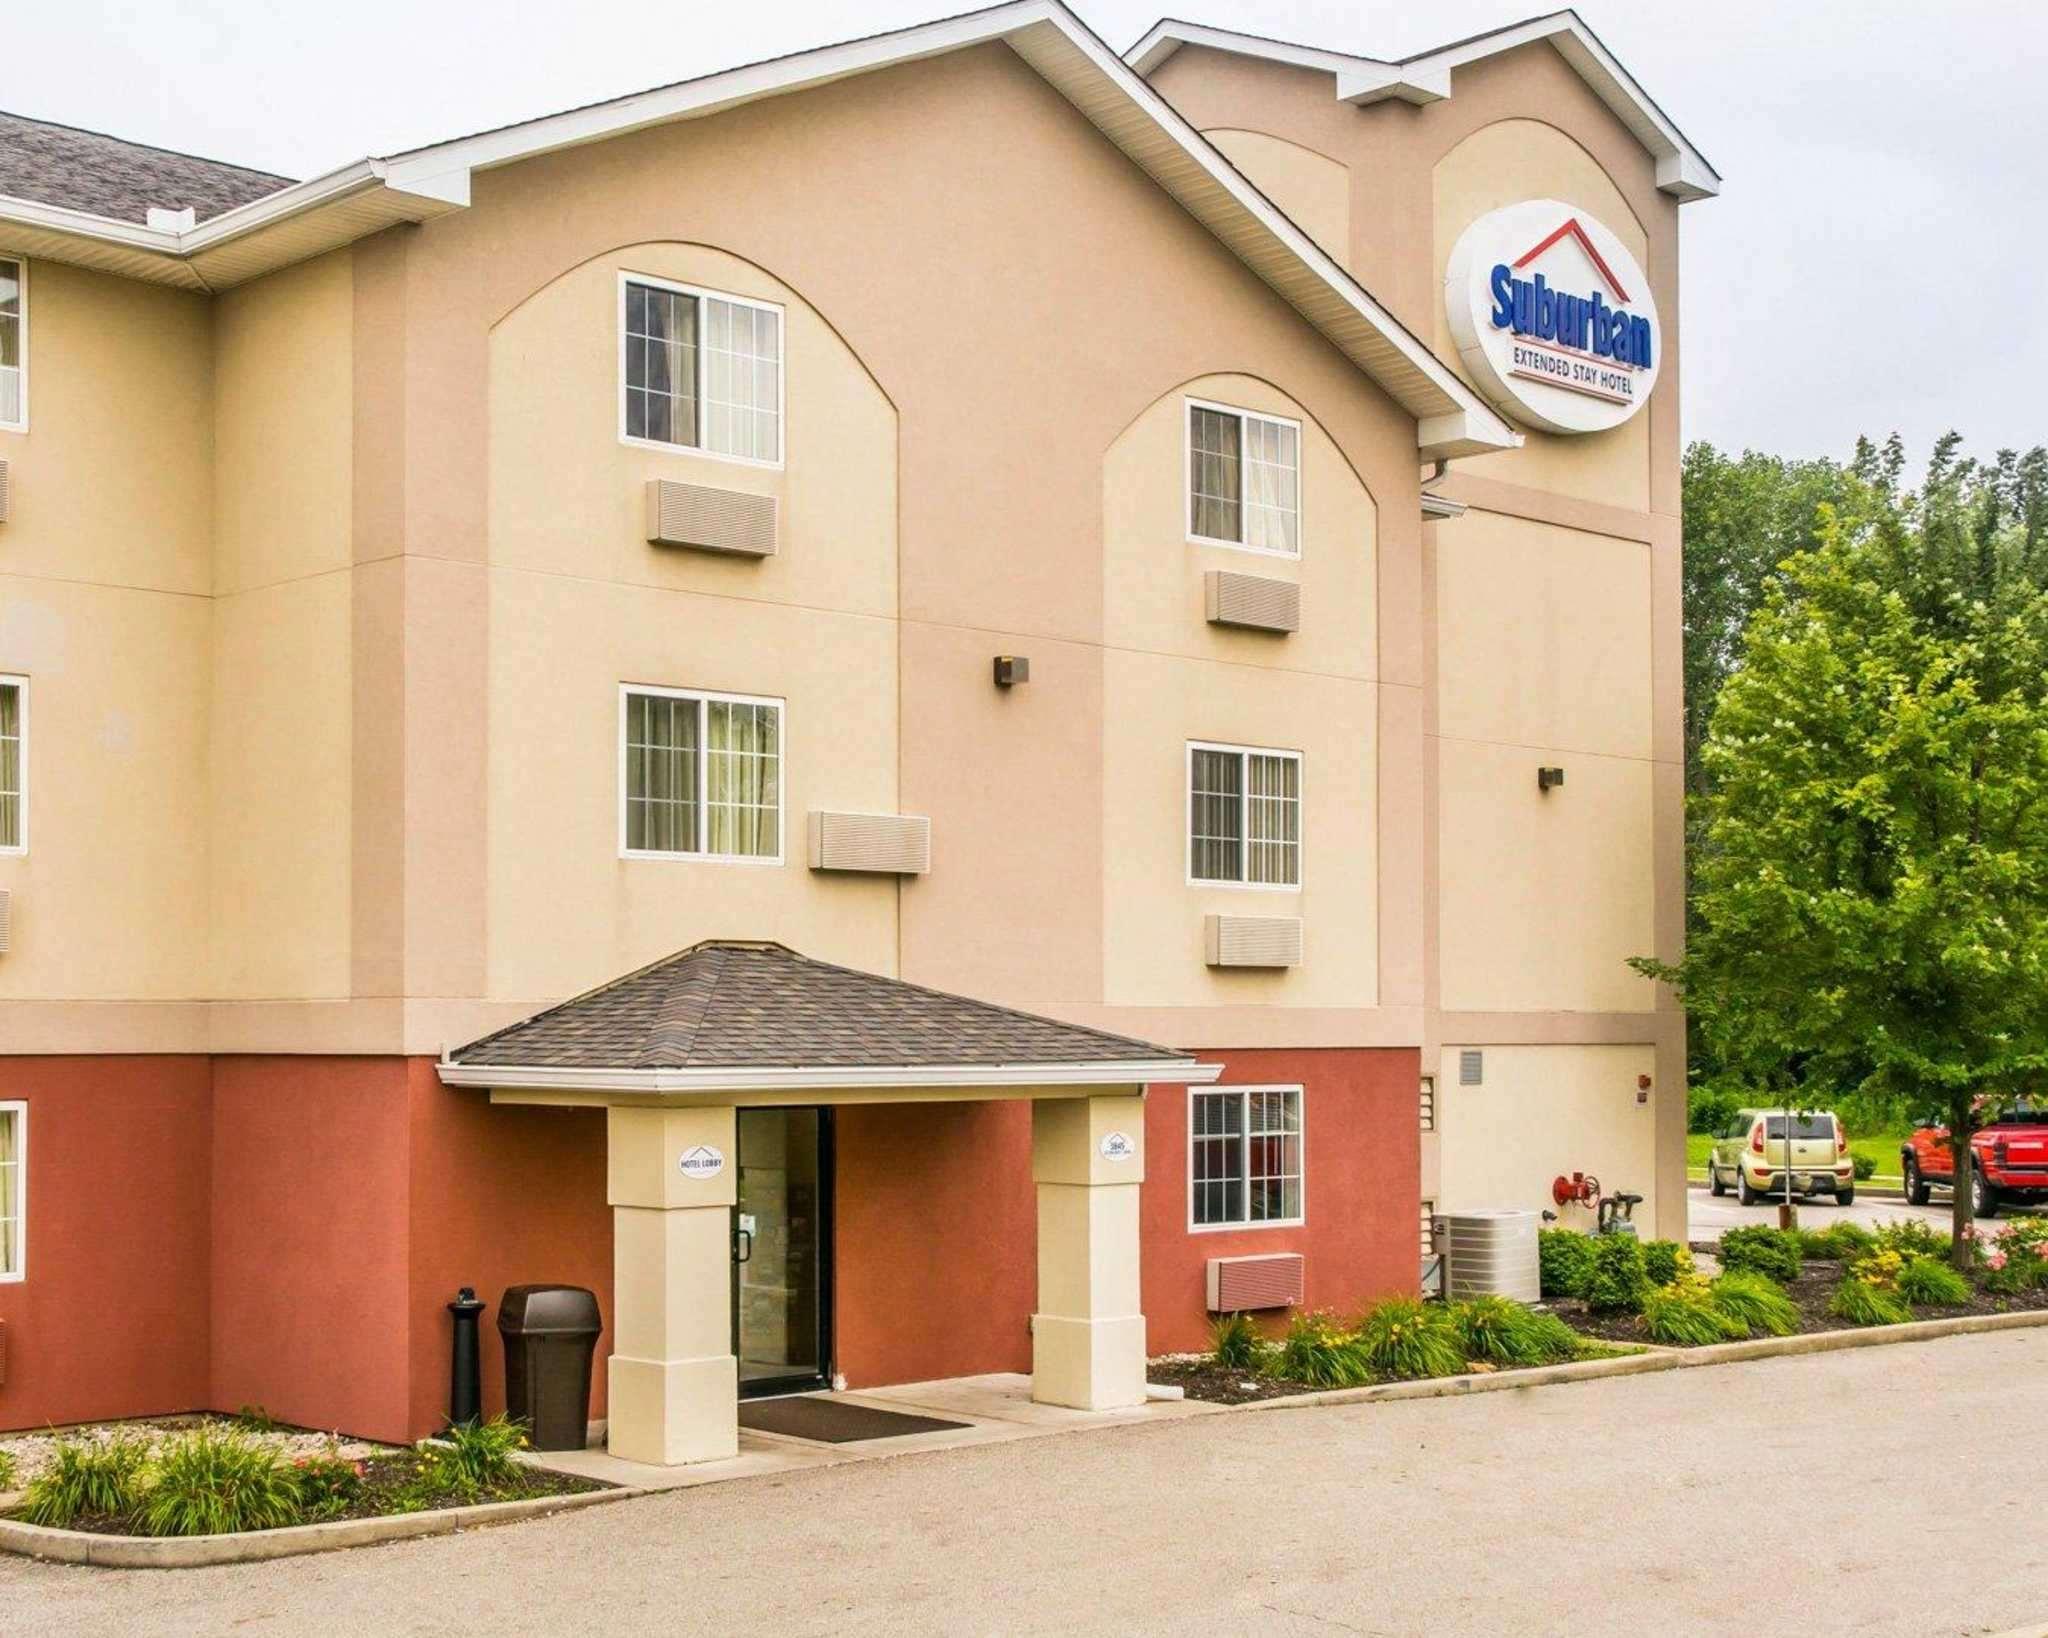 Suburban Extended Stay Hotel Dayton - WP AFB